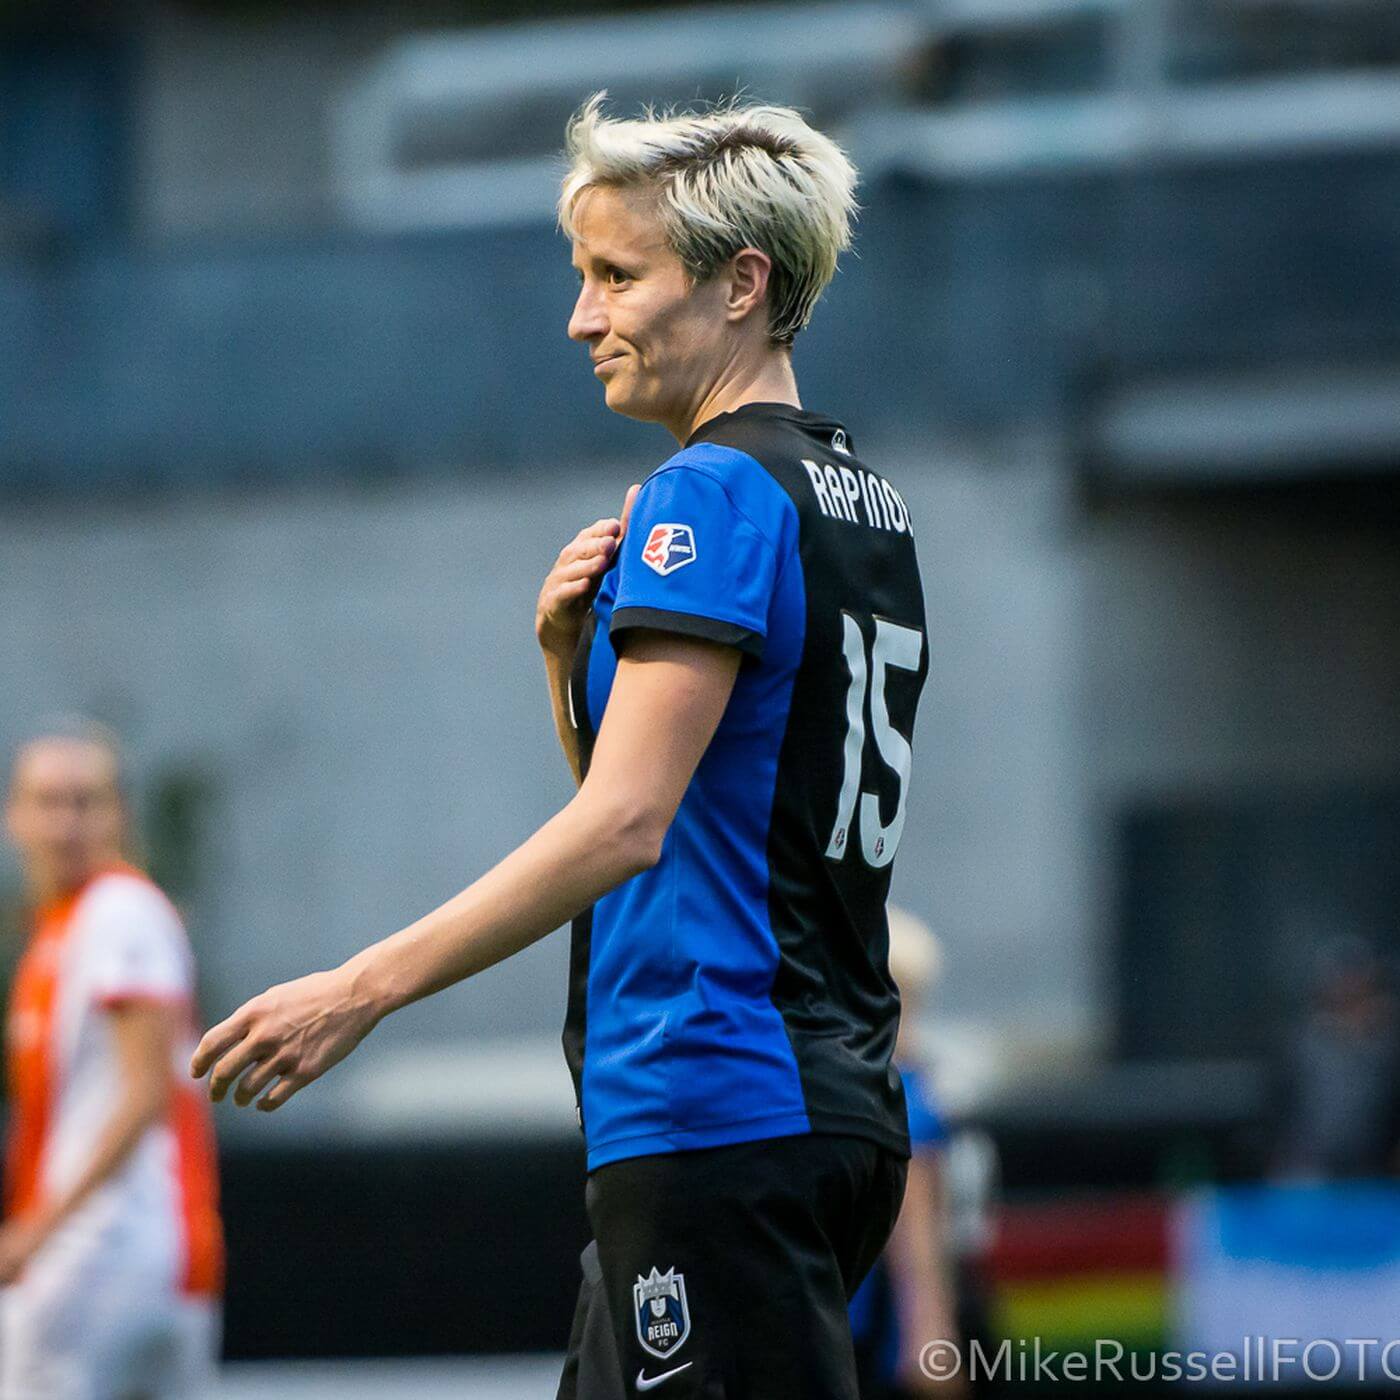 60+ Hot Pictures Of Megan Rapinoe Are Truly Work Of Art – The Viraler